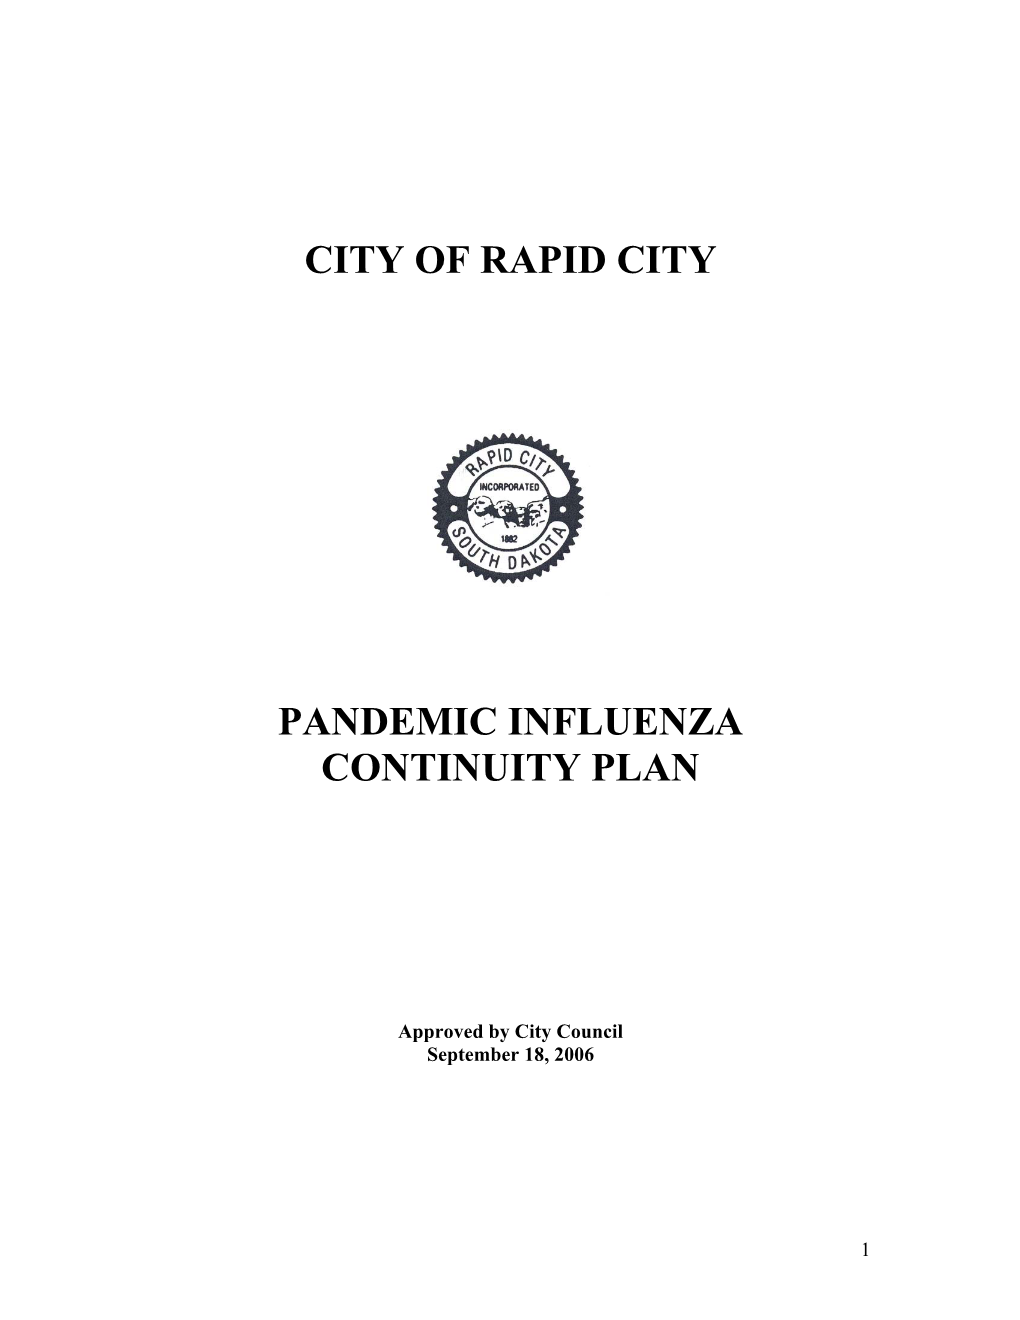 City of Rapid City Pandemic Influenza Continuity Plan